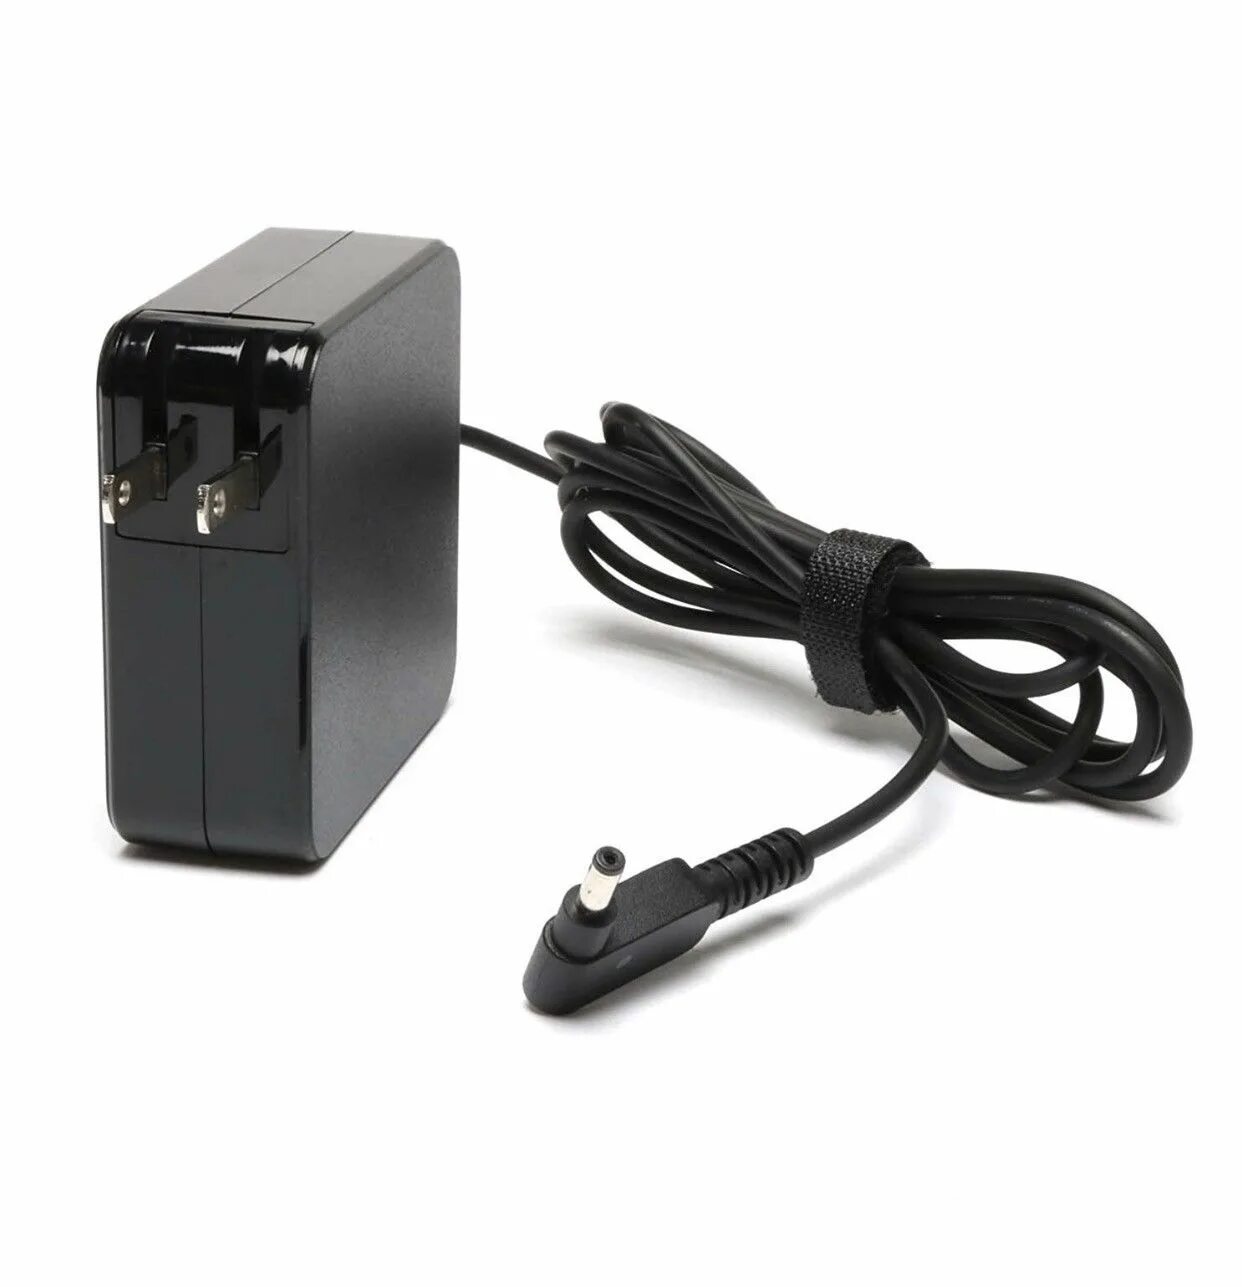 ASUS ux31 зарядное. Адаптер ASUS 19v 3.42a 4*1.35. AC Adapter for ASUS ZENBOOK pa-1650-66 ADP-65aw a 4.0mm*1.35mm 65w Laptop Power. ASUS AC Adapter 65w. Зарядники асус